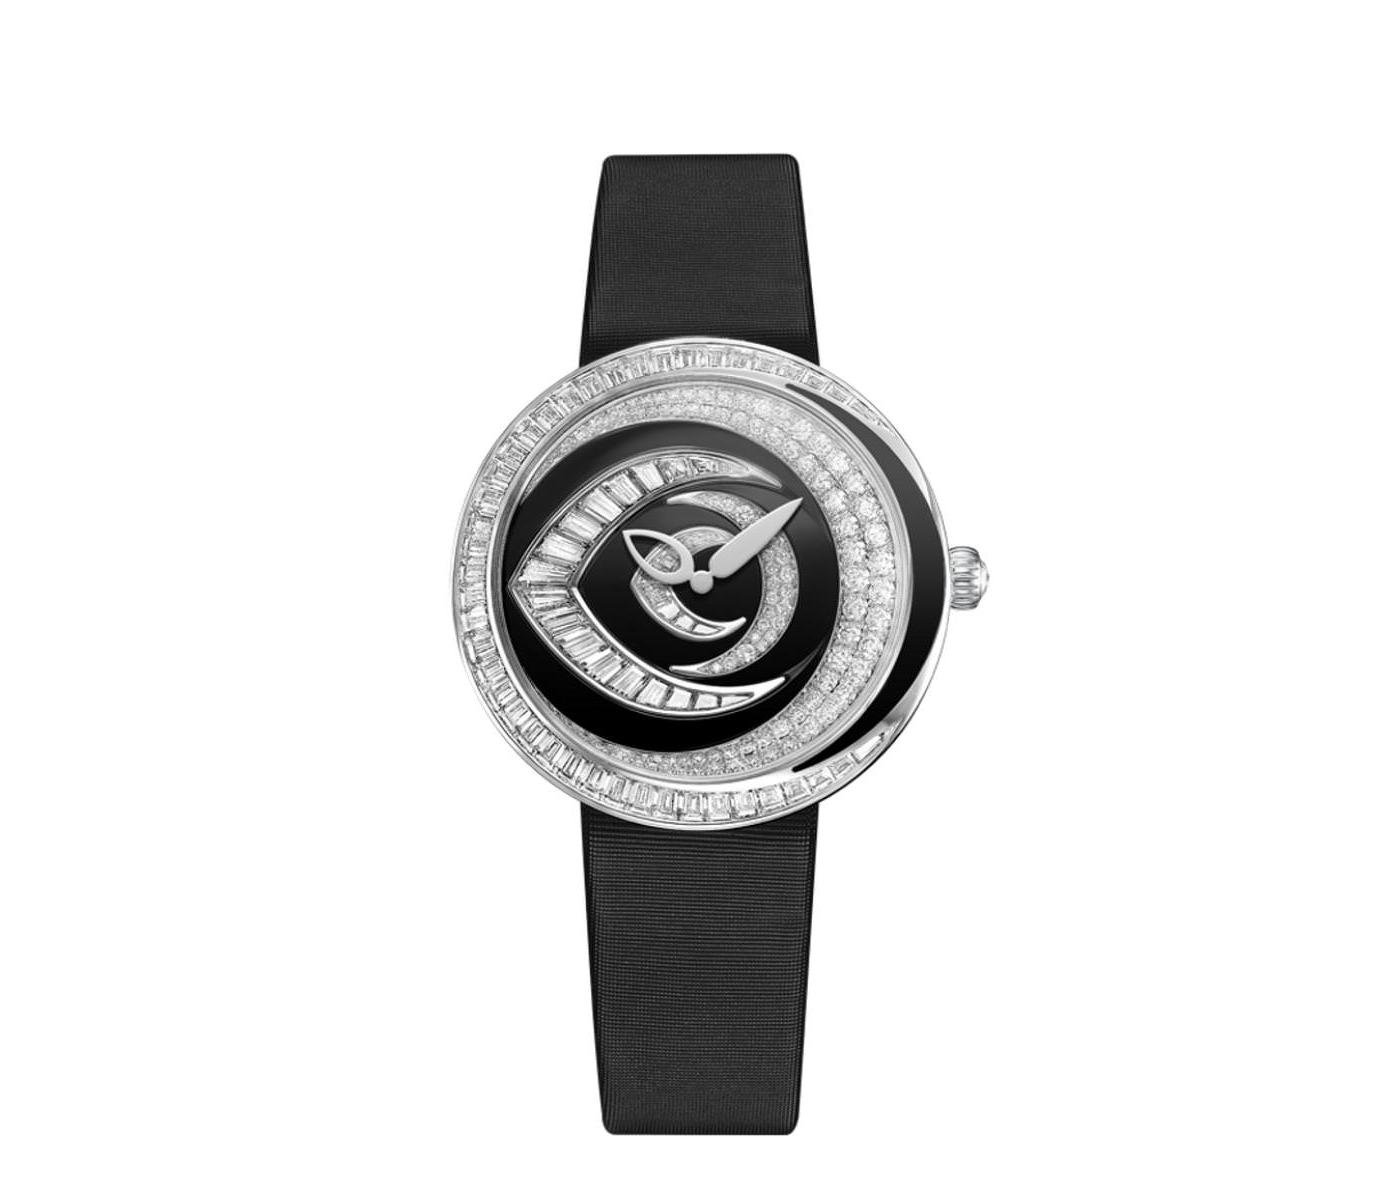 Watch by Chaumet